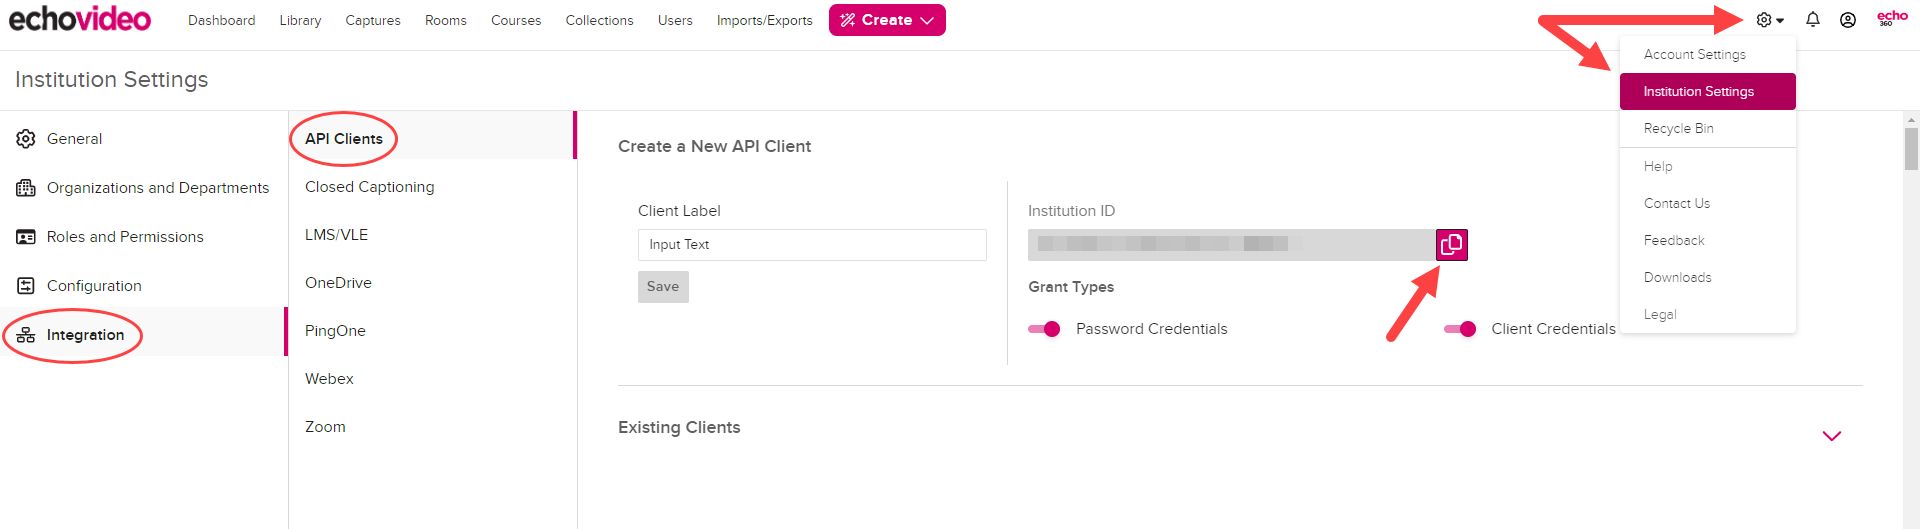 API Configurations page with arrows showing navigation to the page and the institution ID field as described